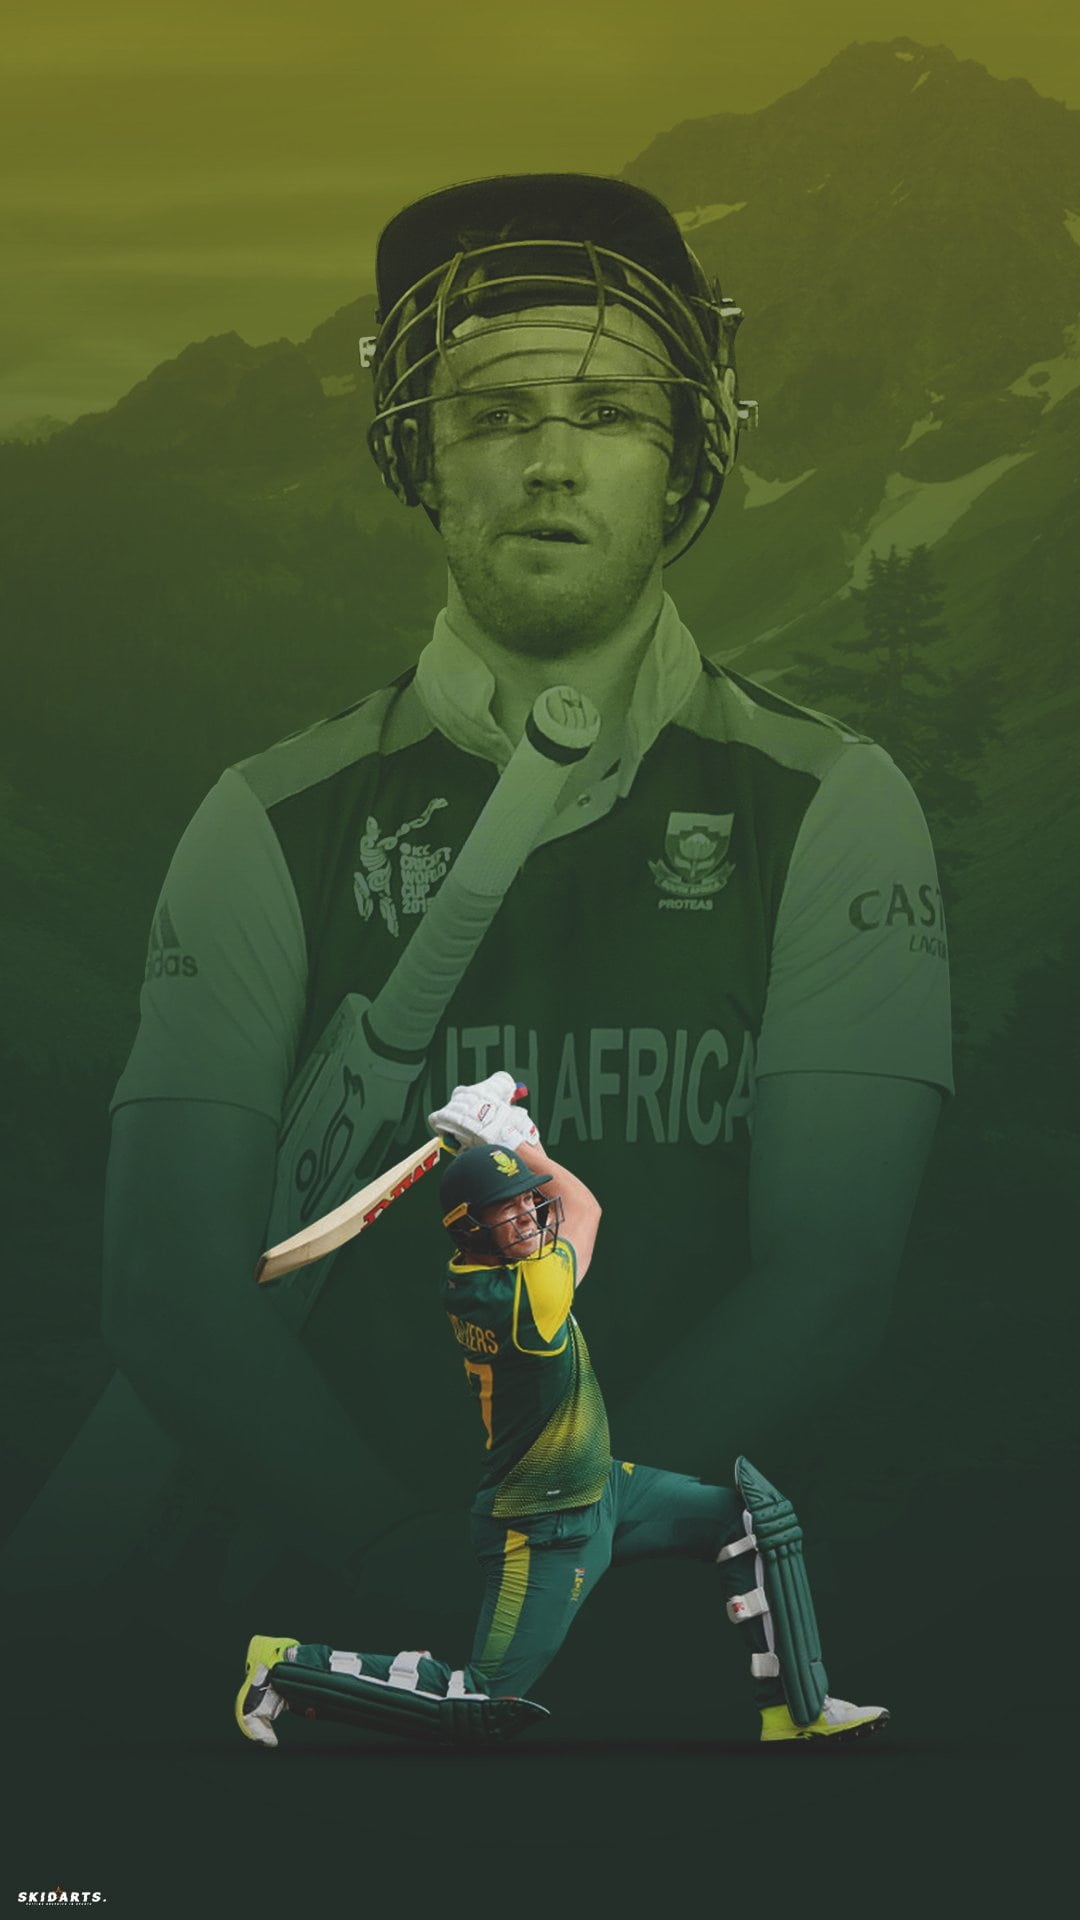 Ab De Villiers - South African Cricketer